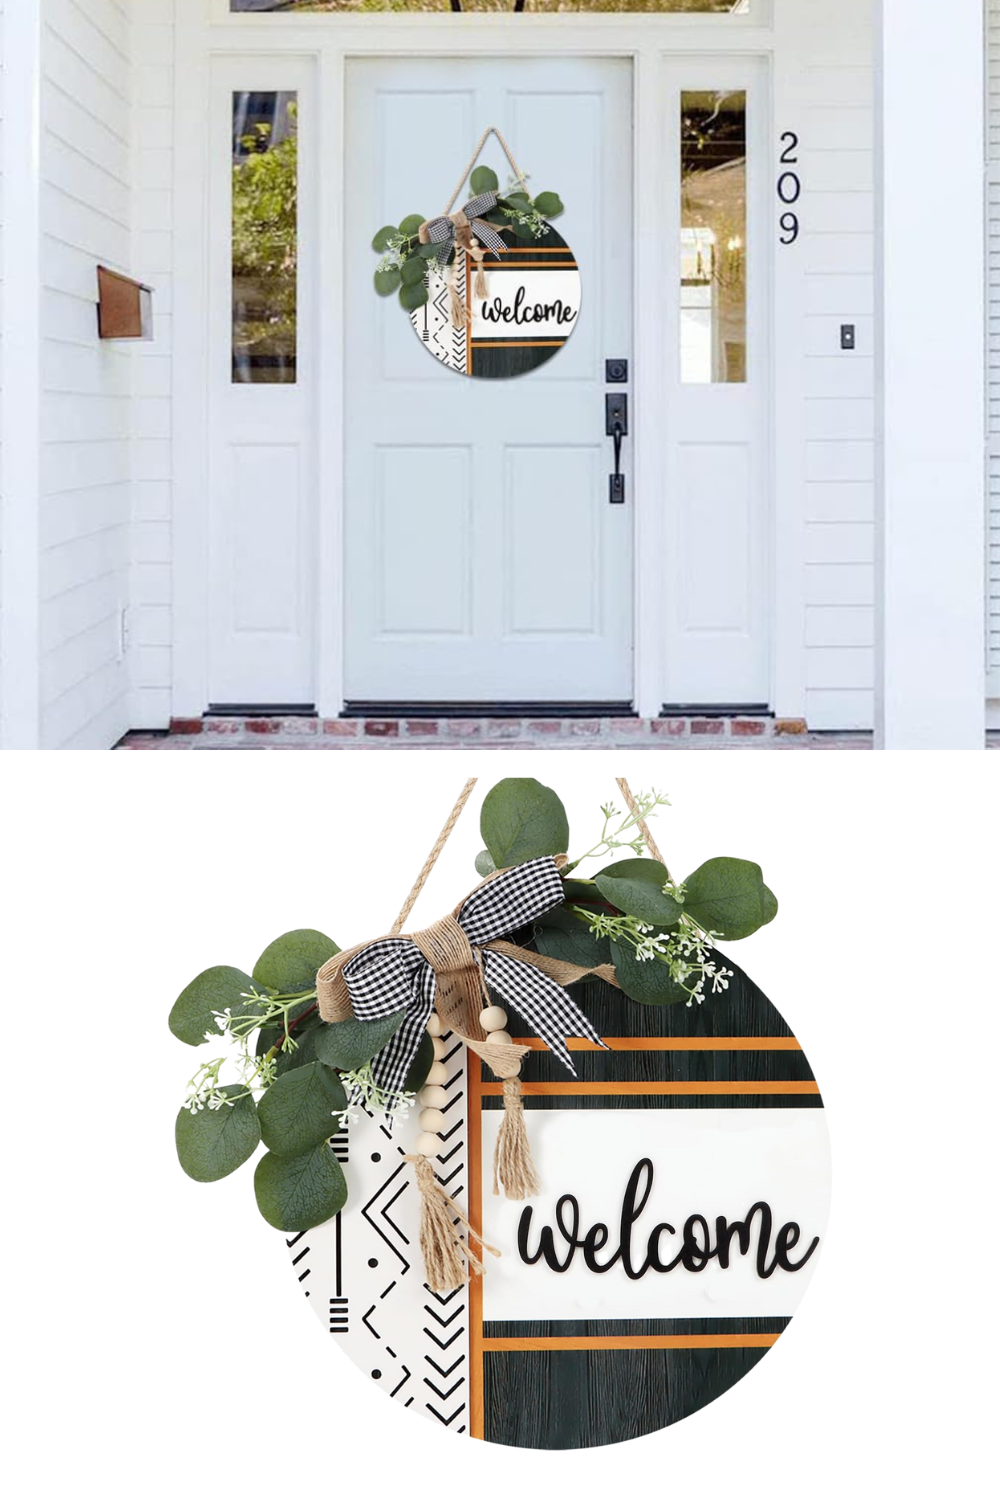 Boho 3D Welcome Wreath for Front Door(11.42"x11.42"), Rustic Farmhouse Porch Wreath Sign with Eucalyptus Leaves Plaid Bow Bead, Round Welcome Home Door Hanger for Porch Outdoor